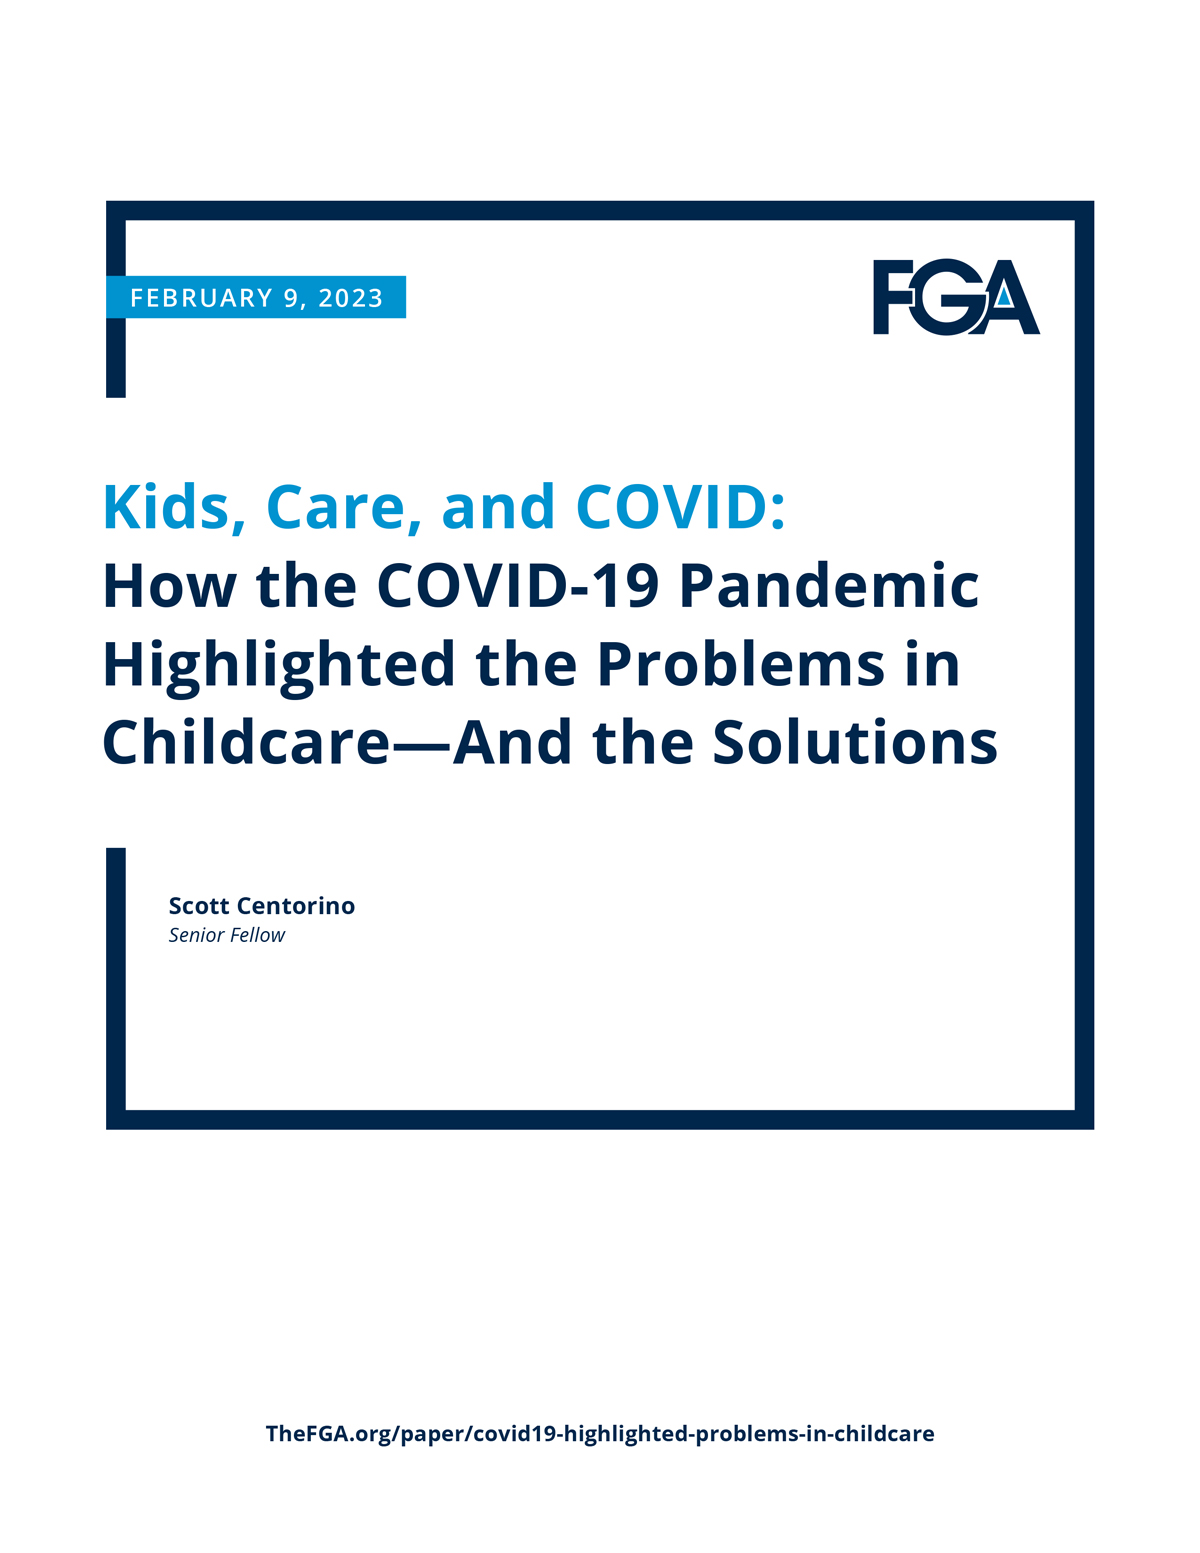 Kids, Care, and COVID: How the COVID-19 Pandemic Highlighted the Problems in Childcare—And the Solutions